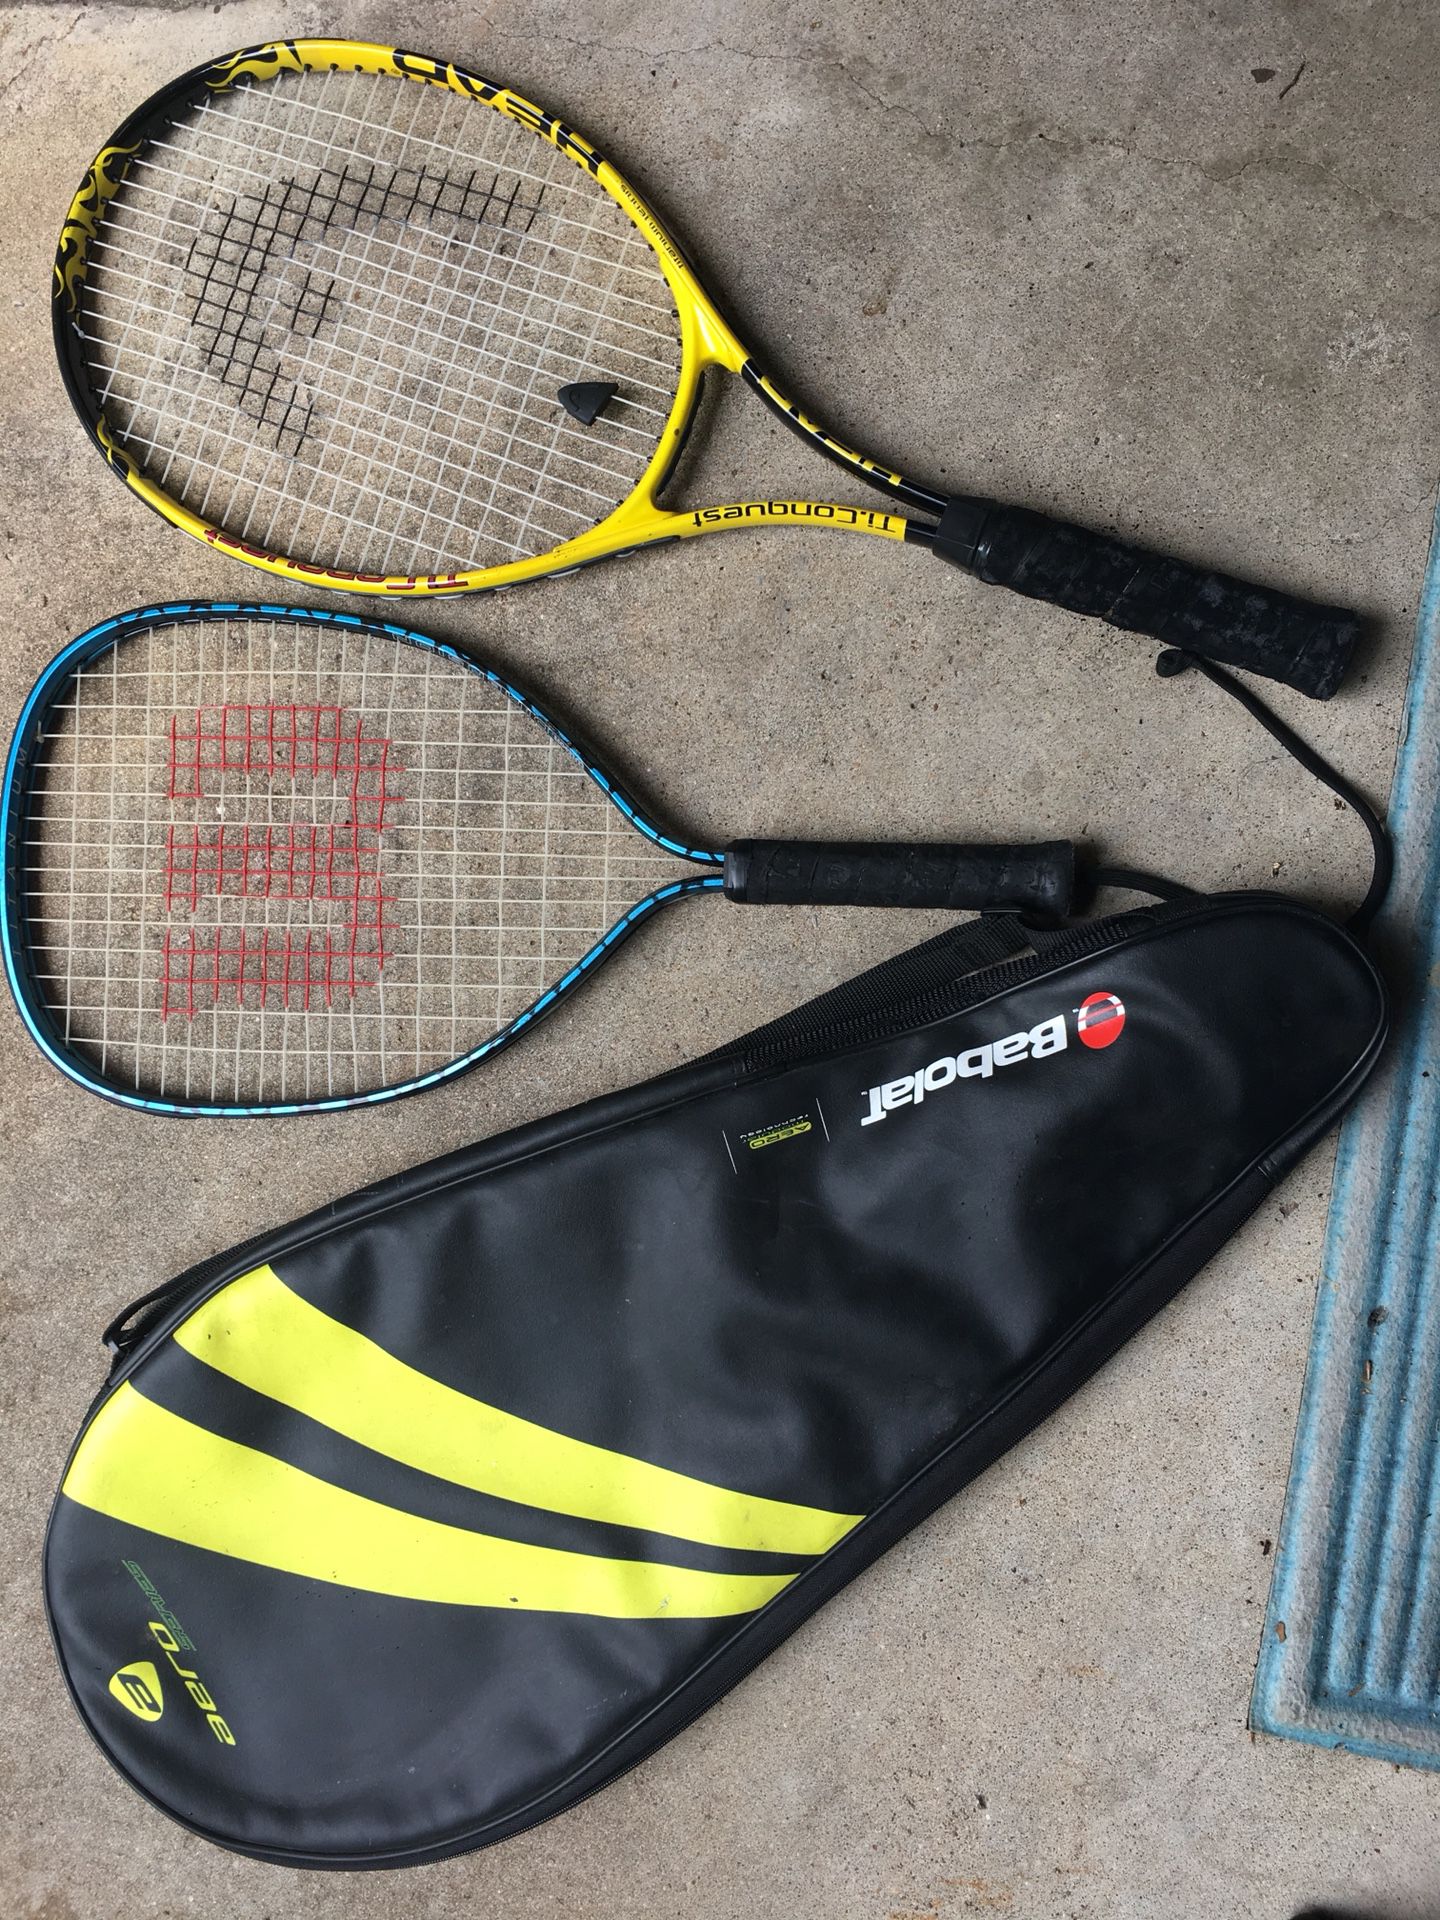 (On hold) 2 Used Tennis Rackets w/ 1 Case - Wilson & Head Brand